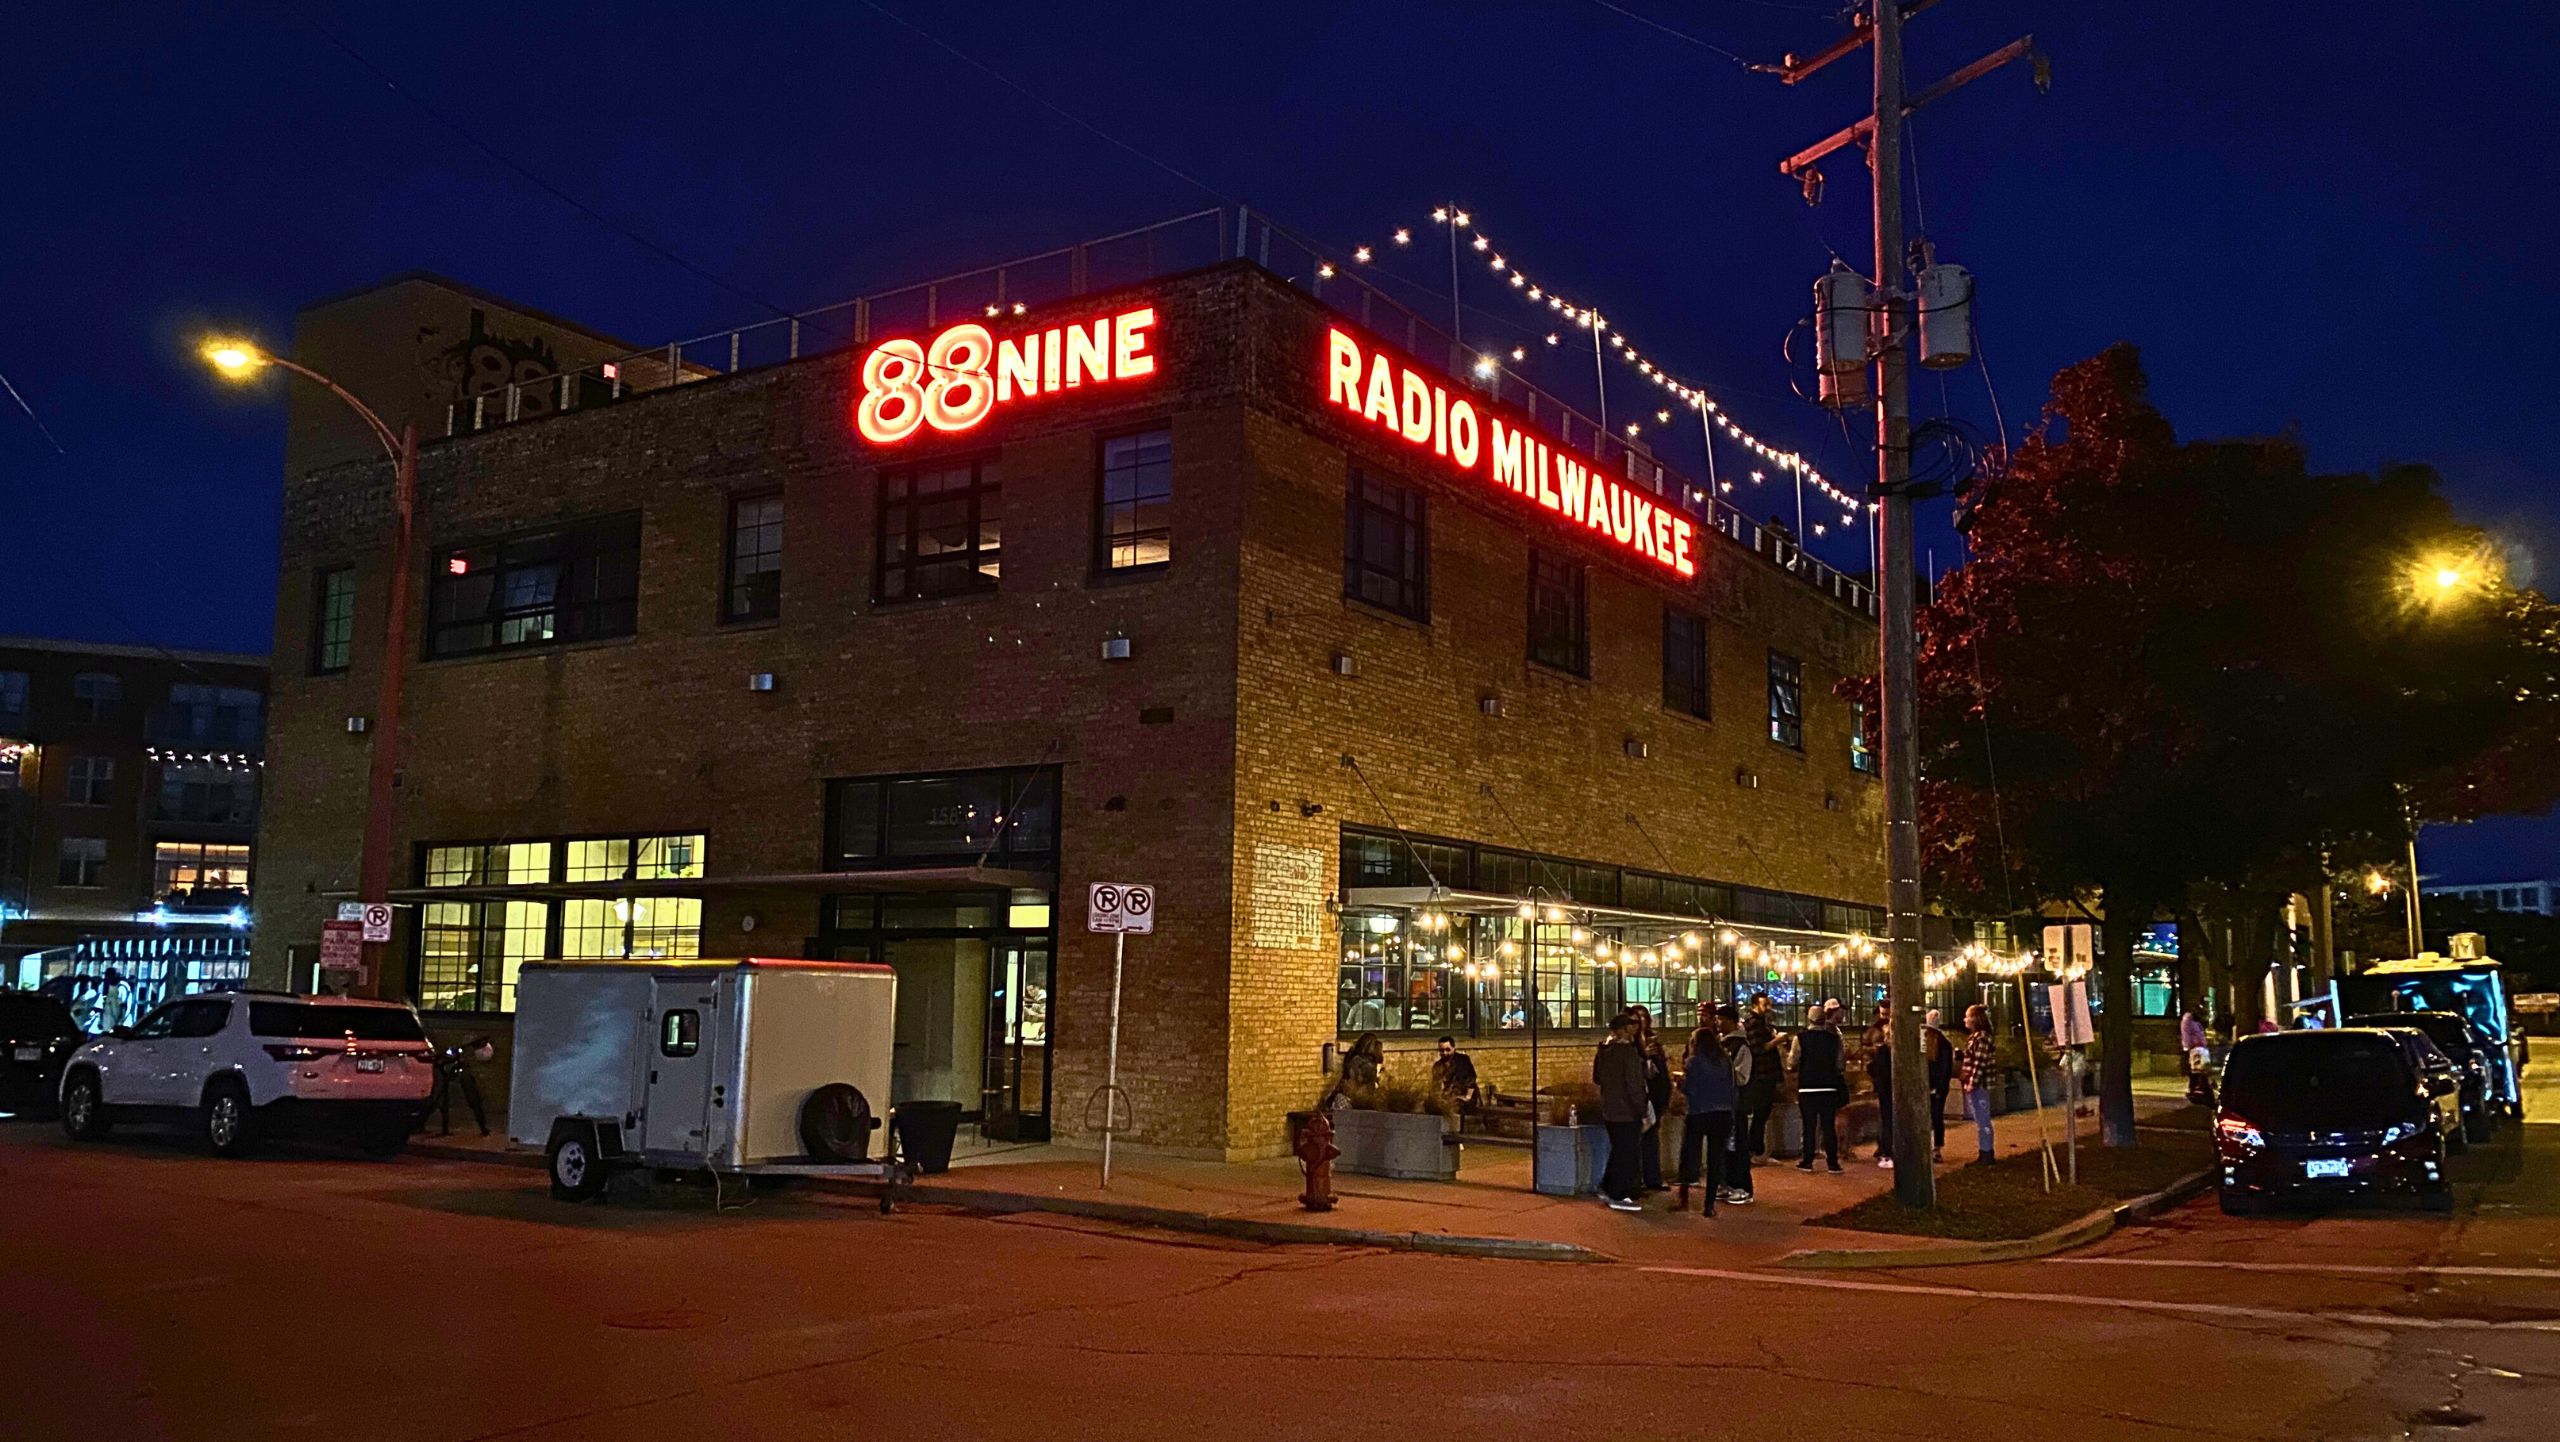 Exterior view of Radio Milwaukee's building at night with their neon signage lit red.